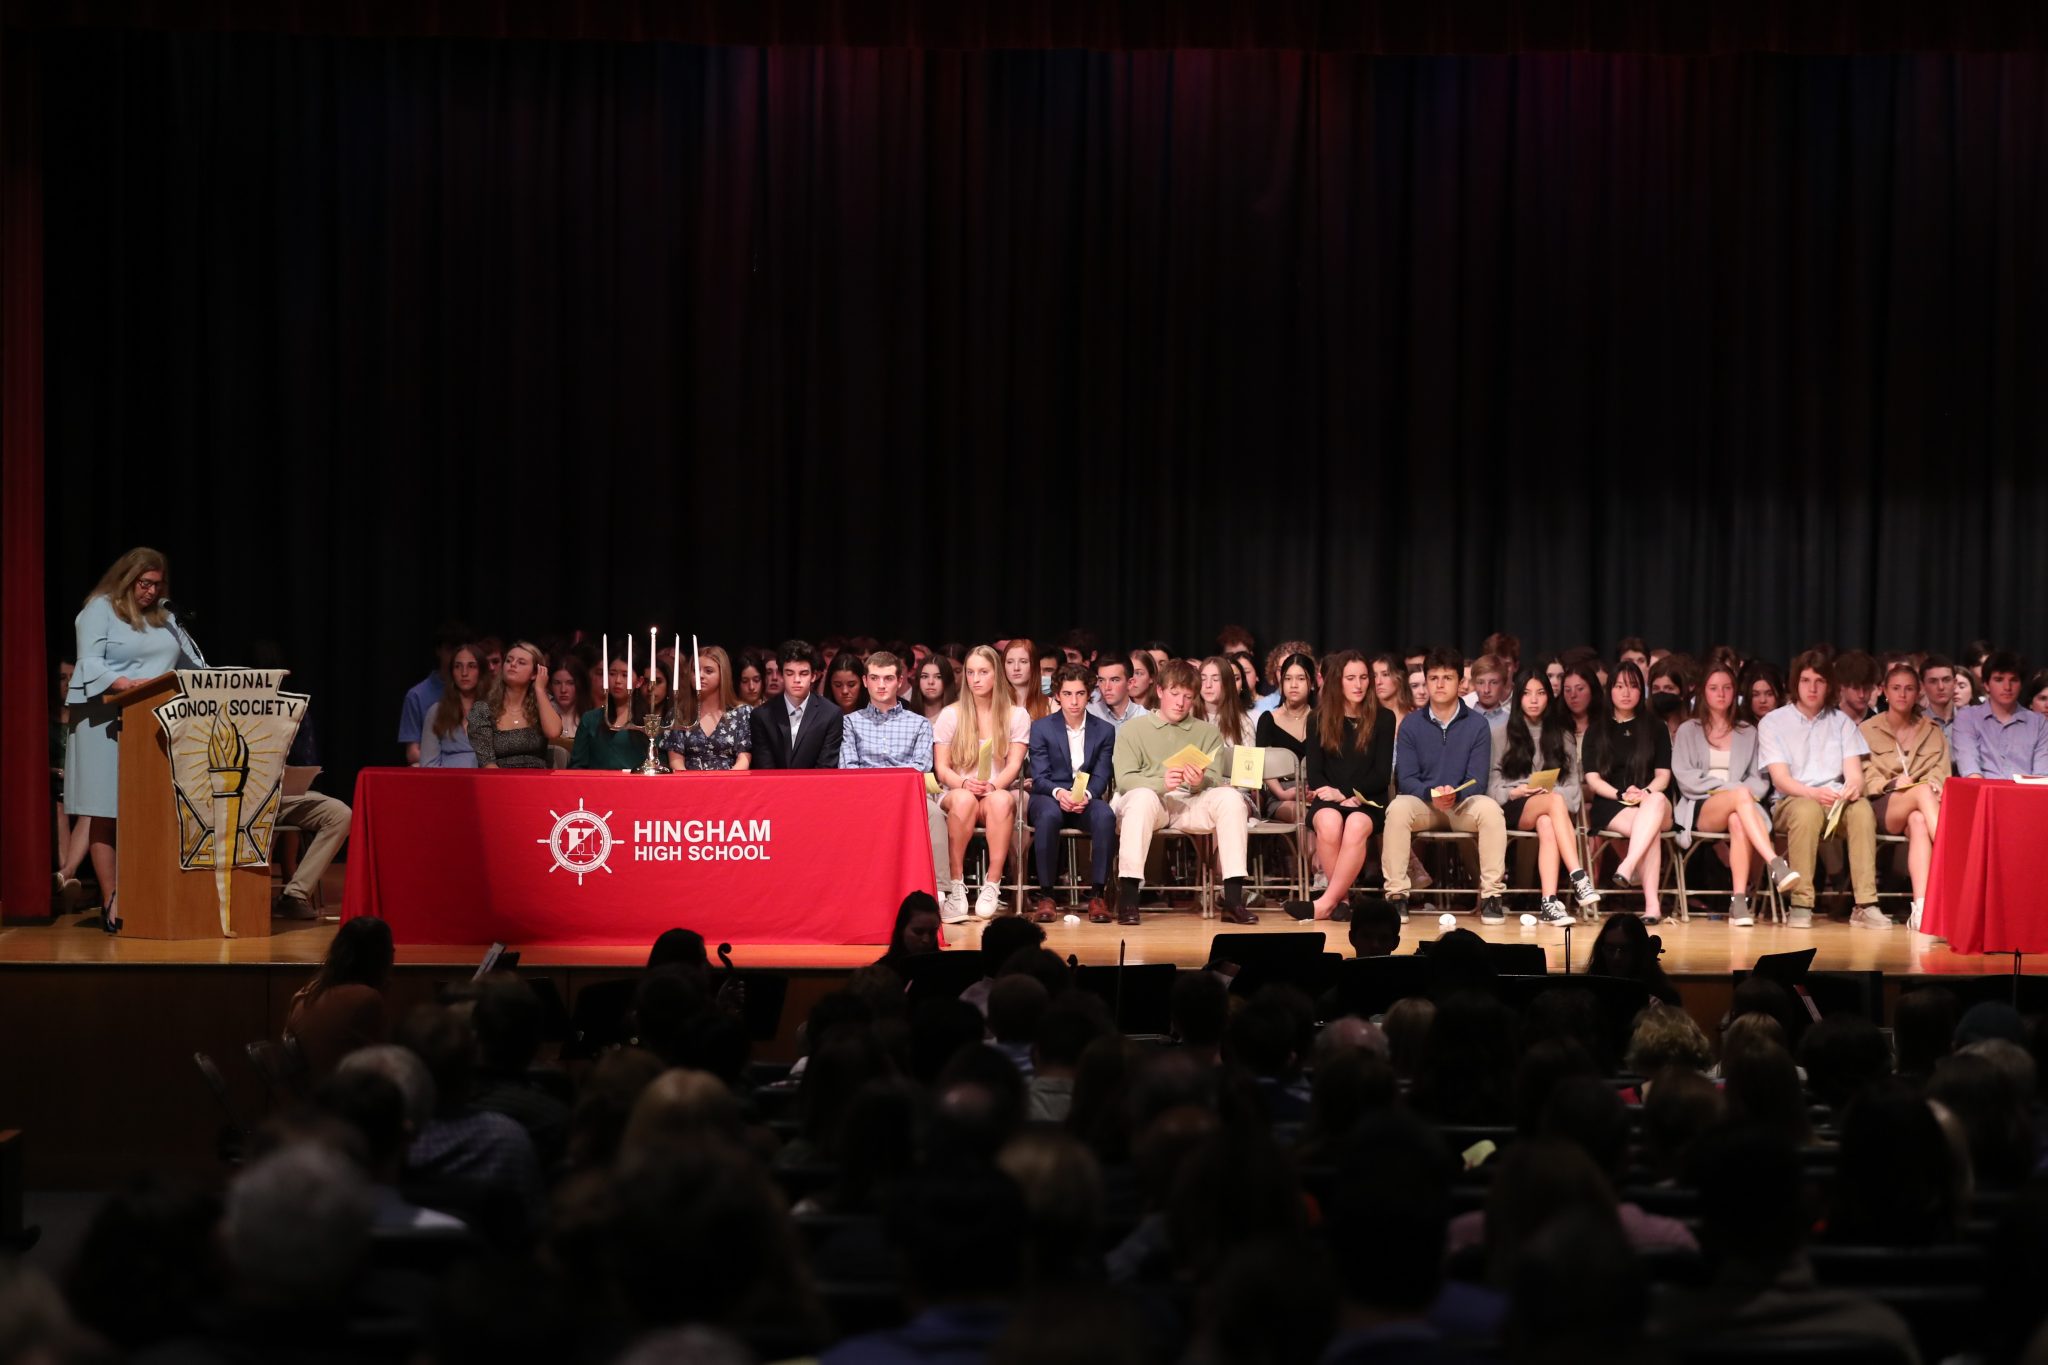 Members of the Class of 2023 sit on stage during their Induction Ceremony.